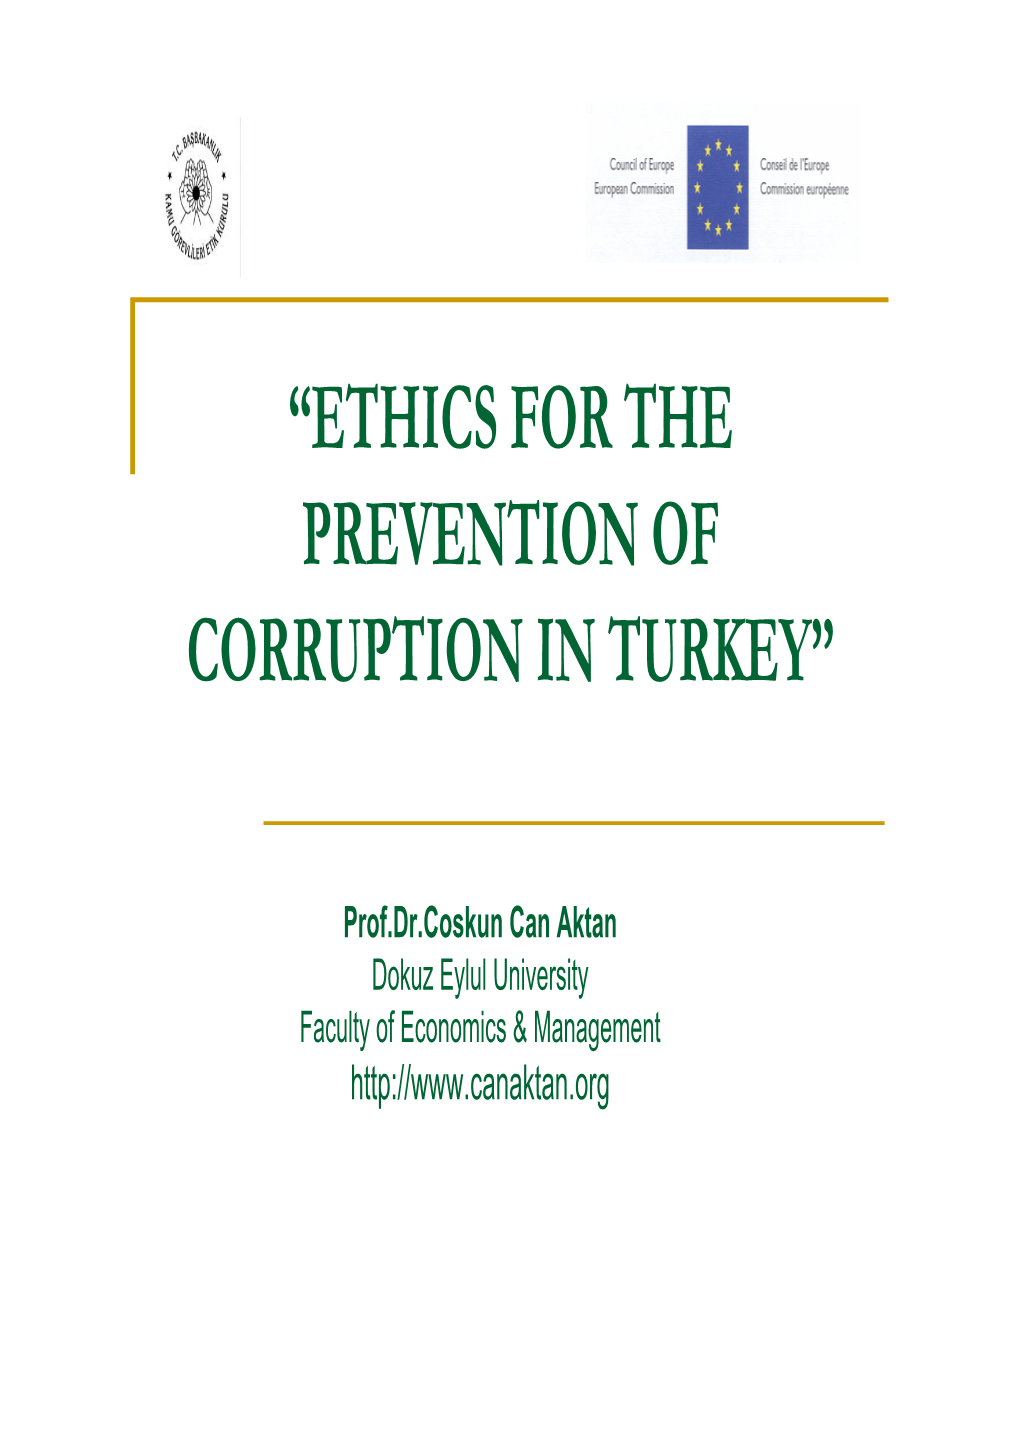 “Ethics for the Prevention of Corruption in Turkey”